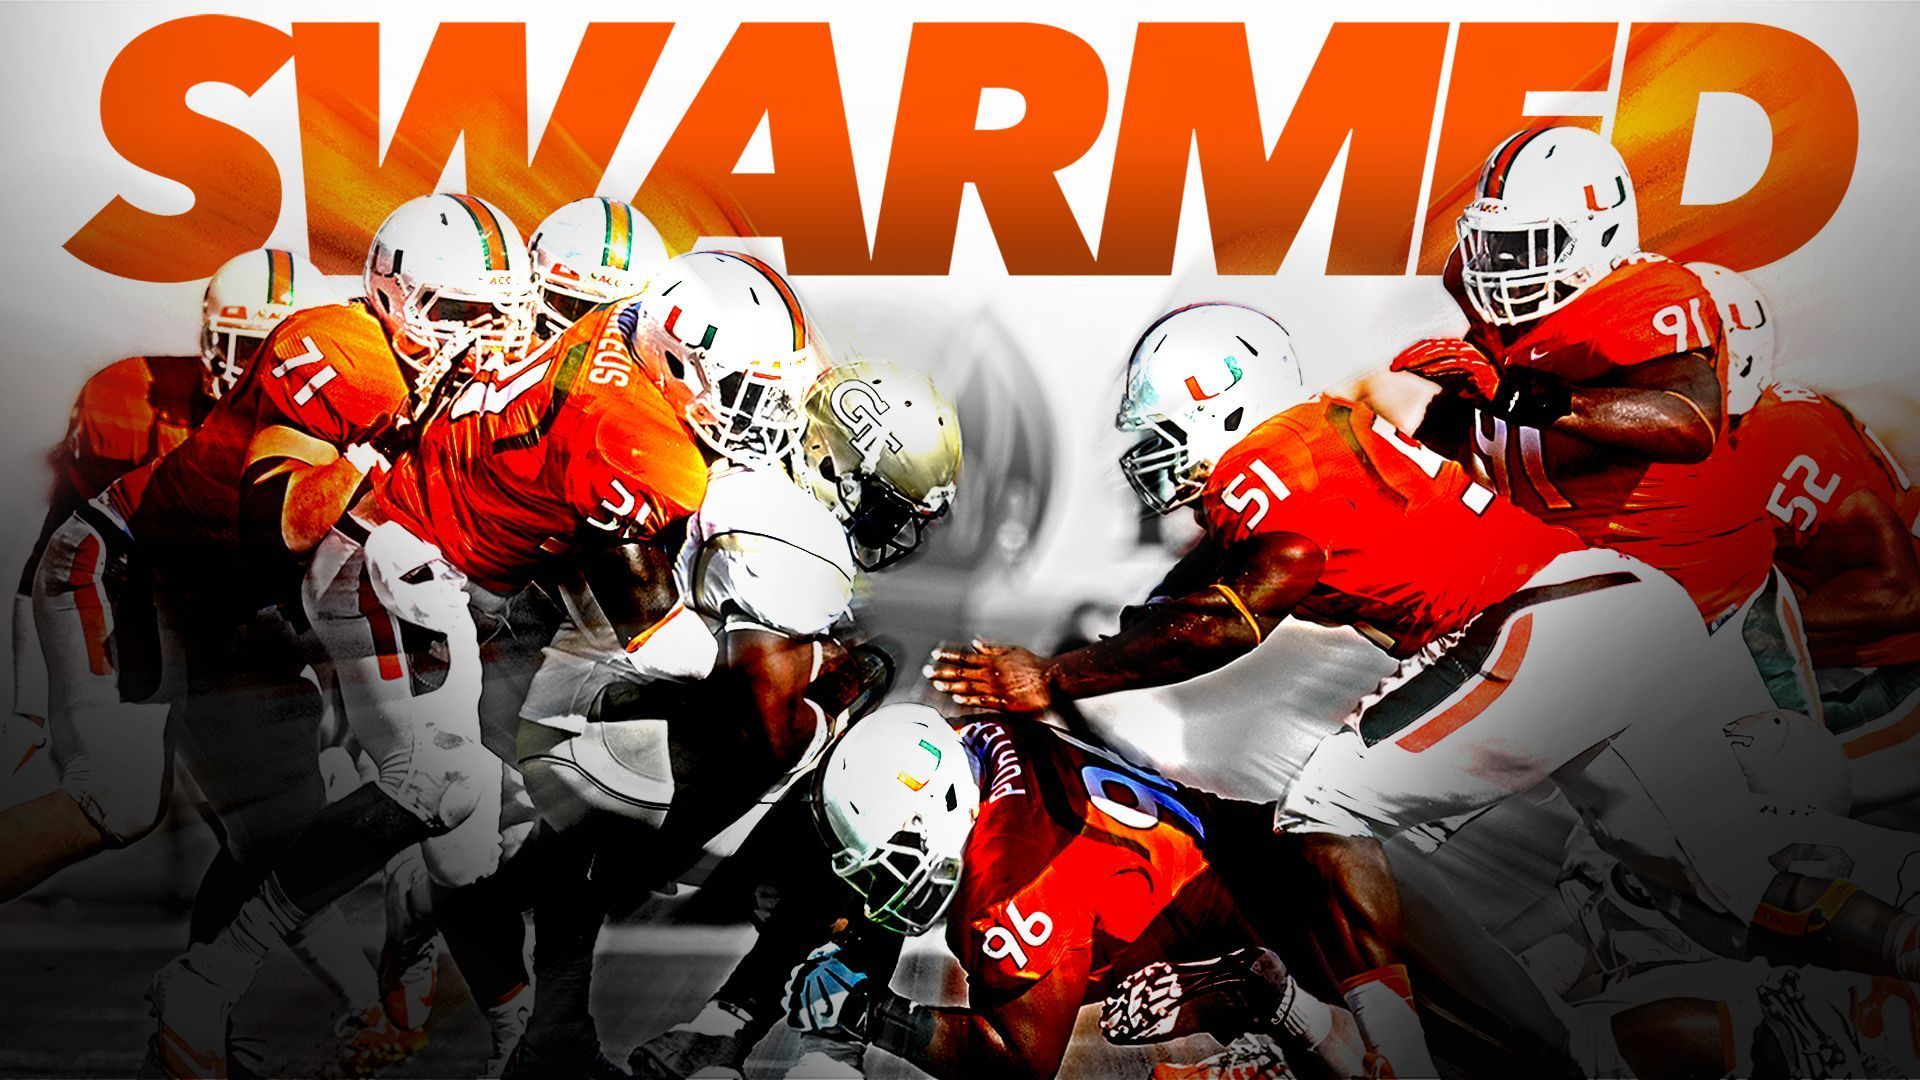 2013-14 Wallpapers - University of Miami Hurricanes Official ...